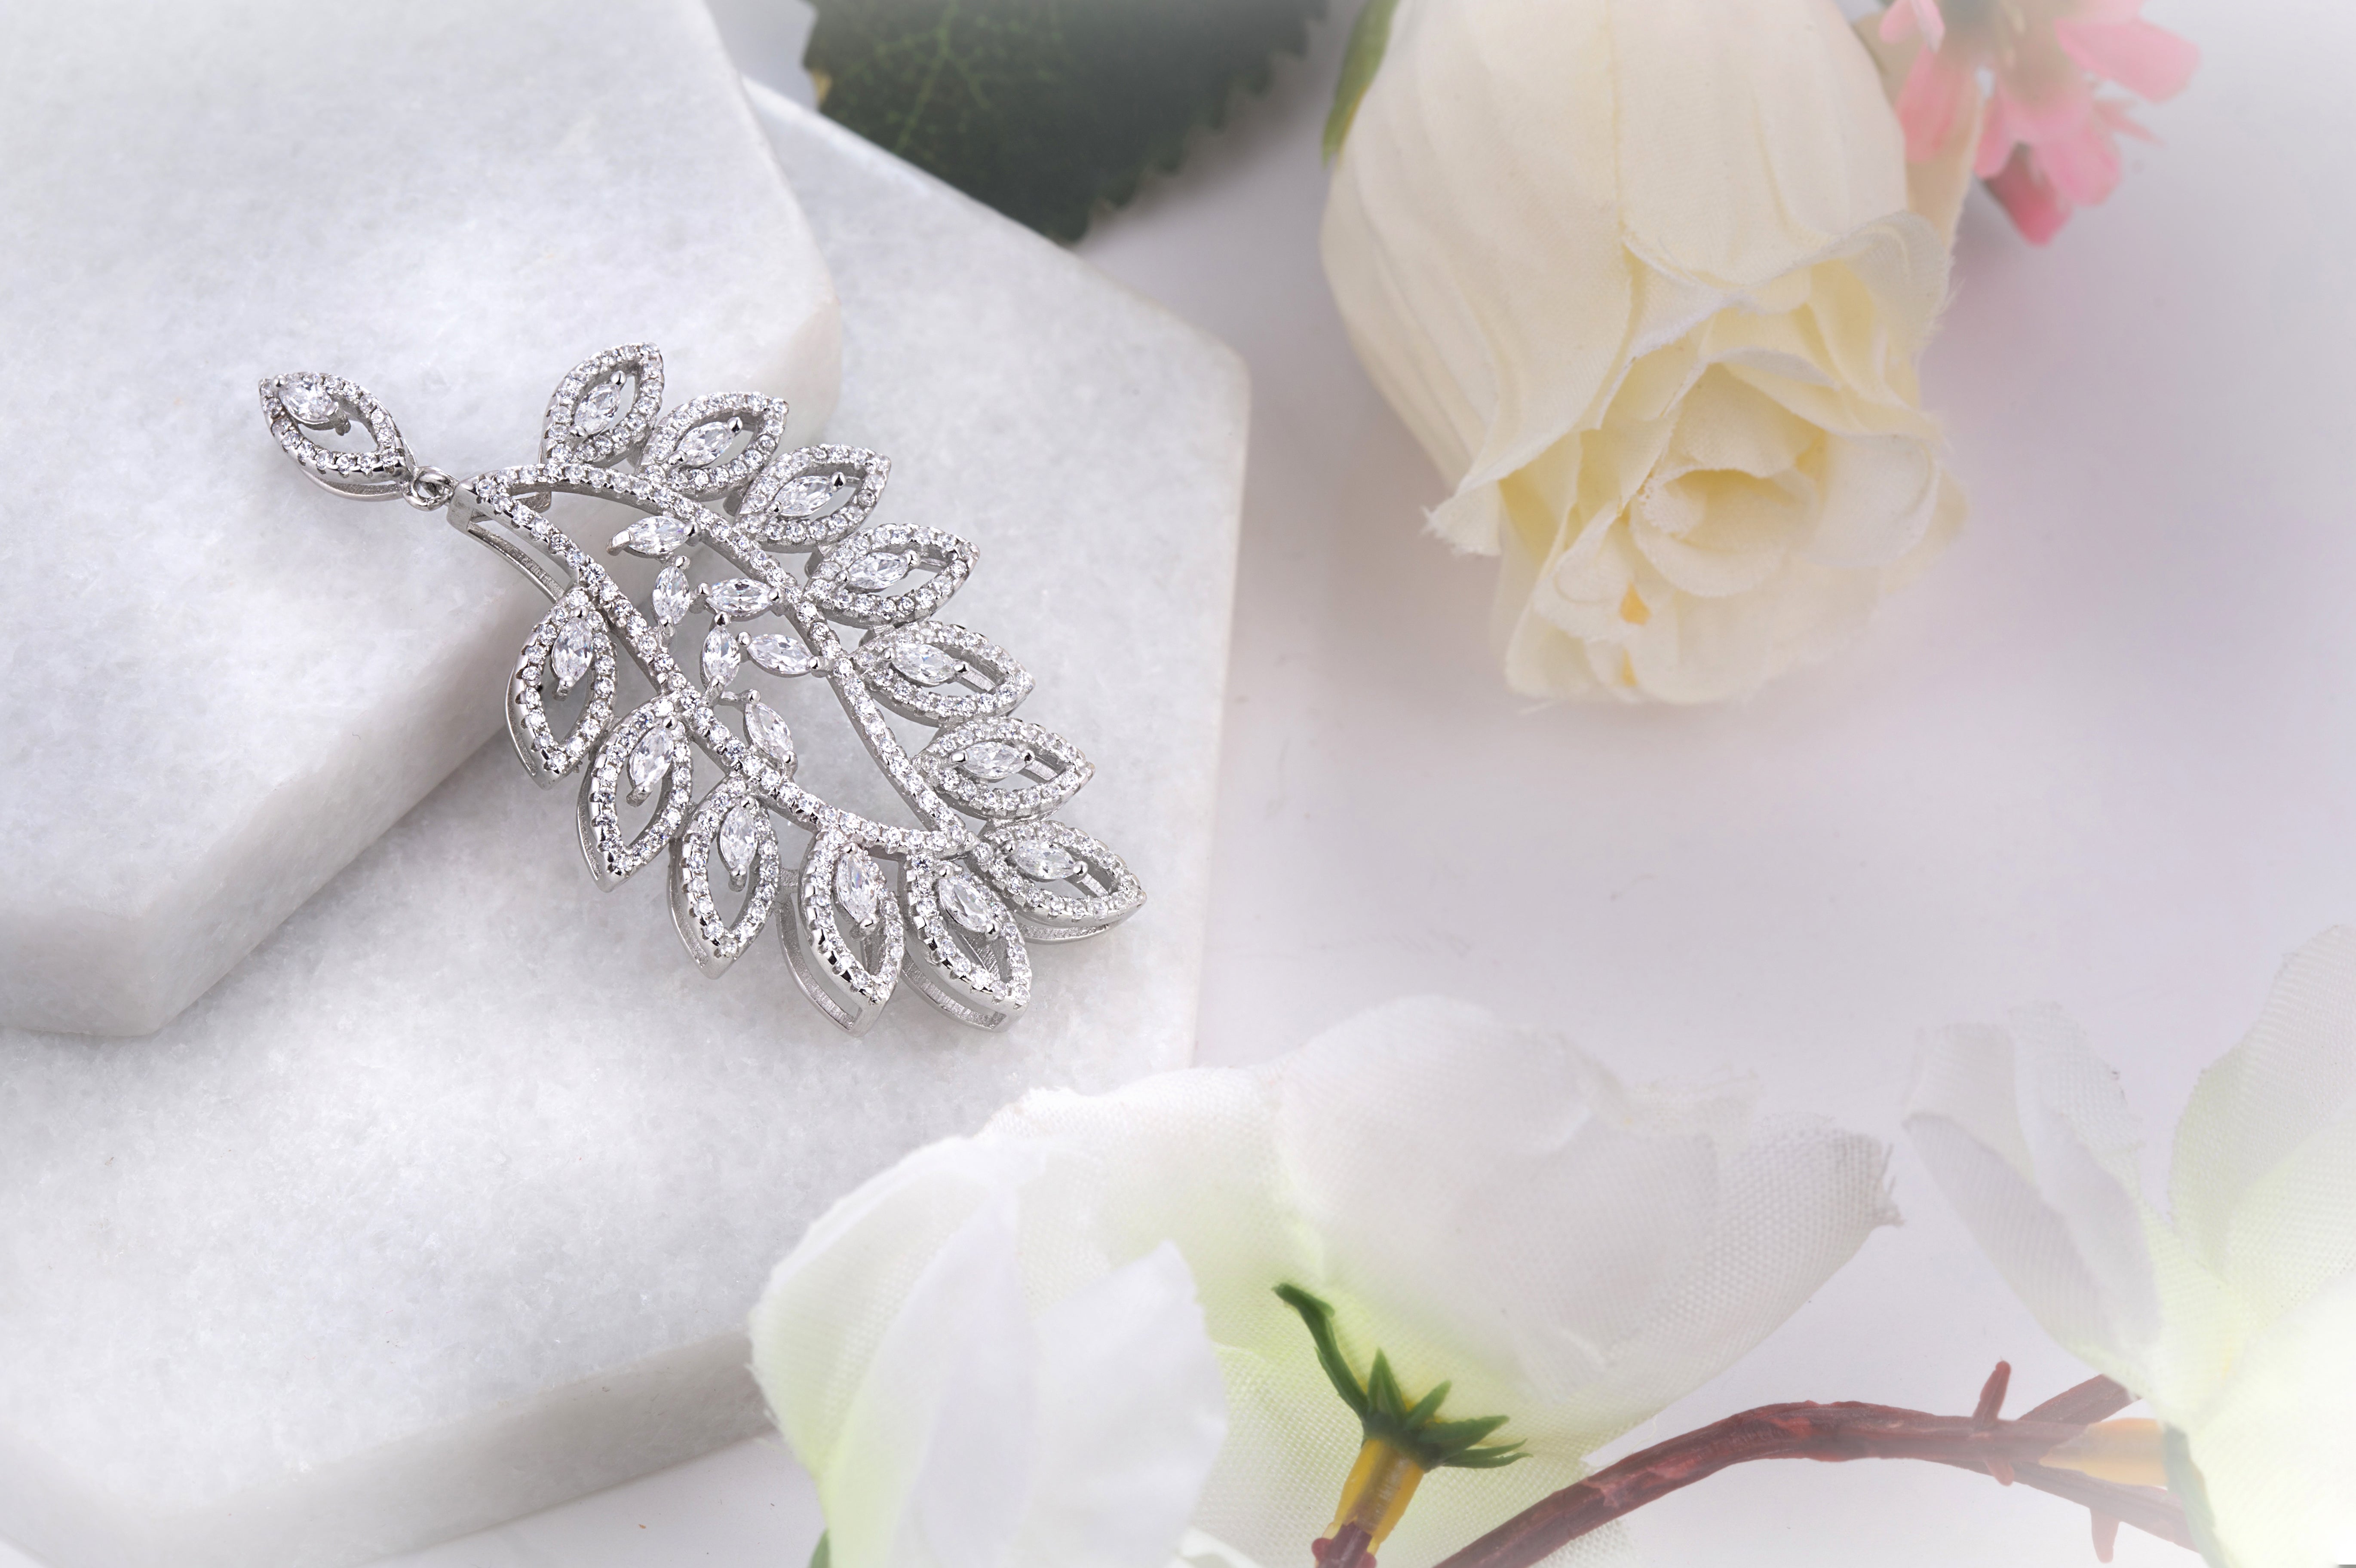 92.5 sterling silver leaf and nature inspired pendant for women studded with zirconia 